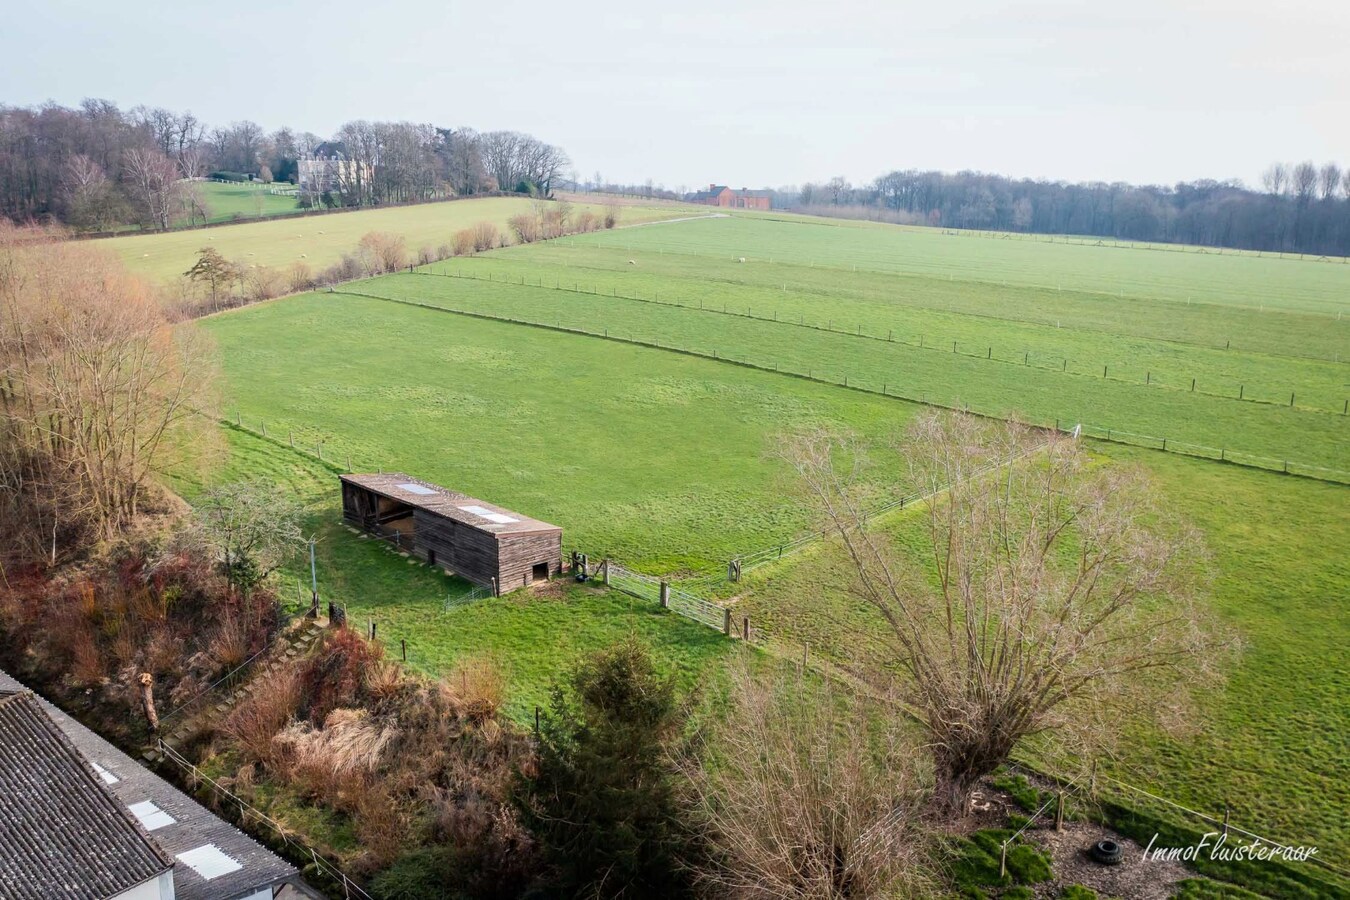 Farm for sale |  with option - with restrictions in Asse